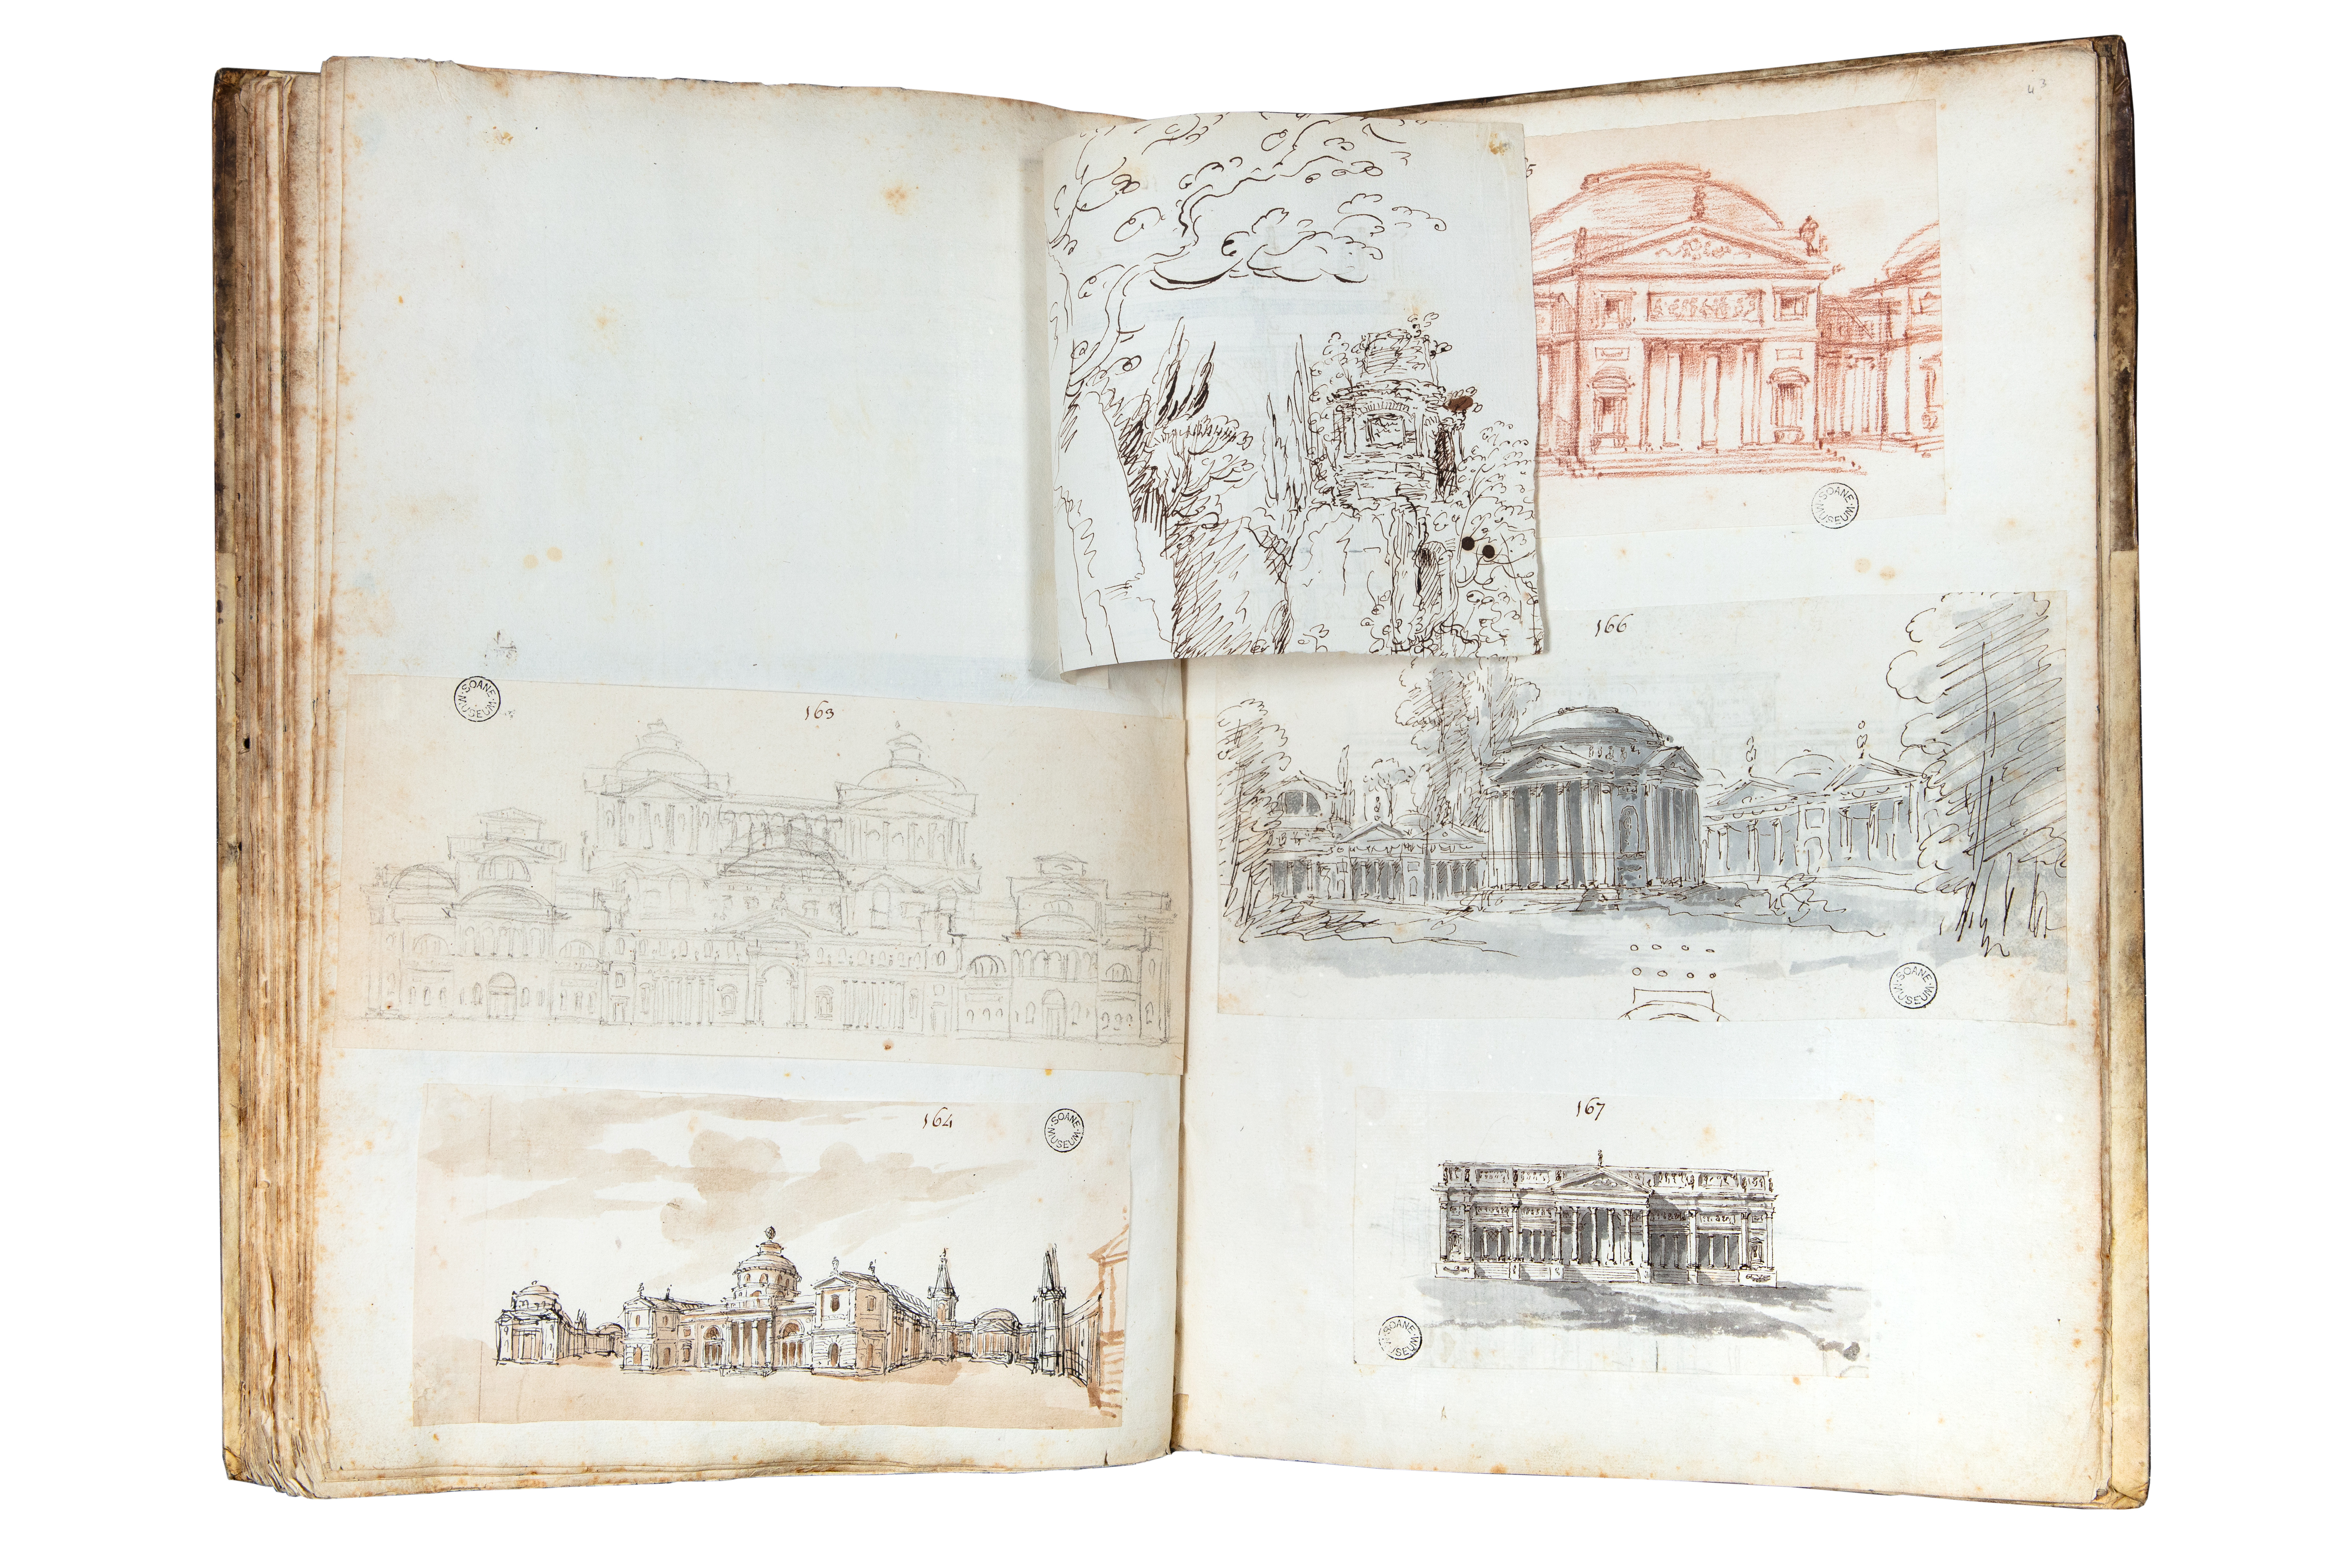 Opened double page with architectural views, on the right-hand page a sheet with a drawing has been folded onto the back